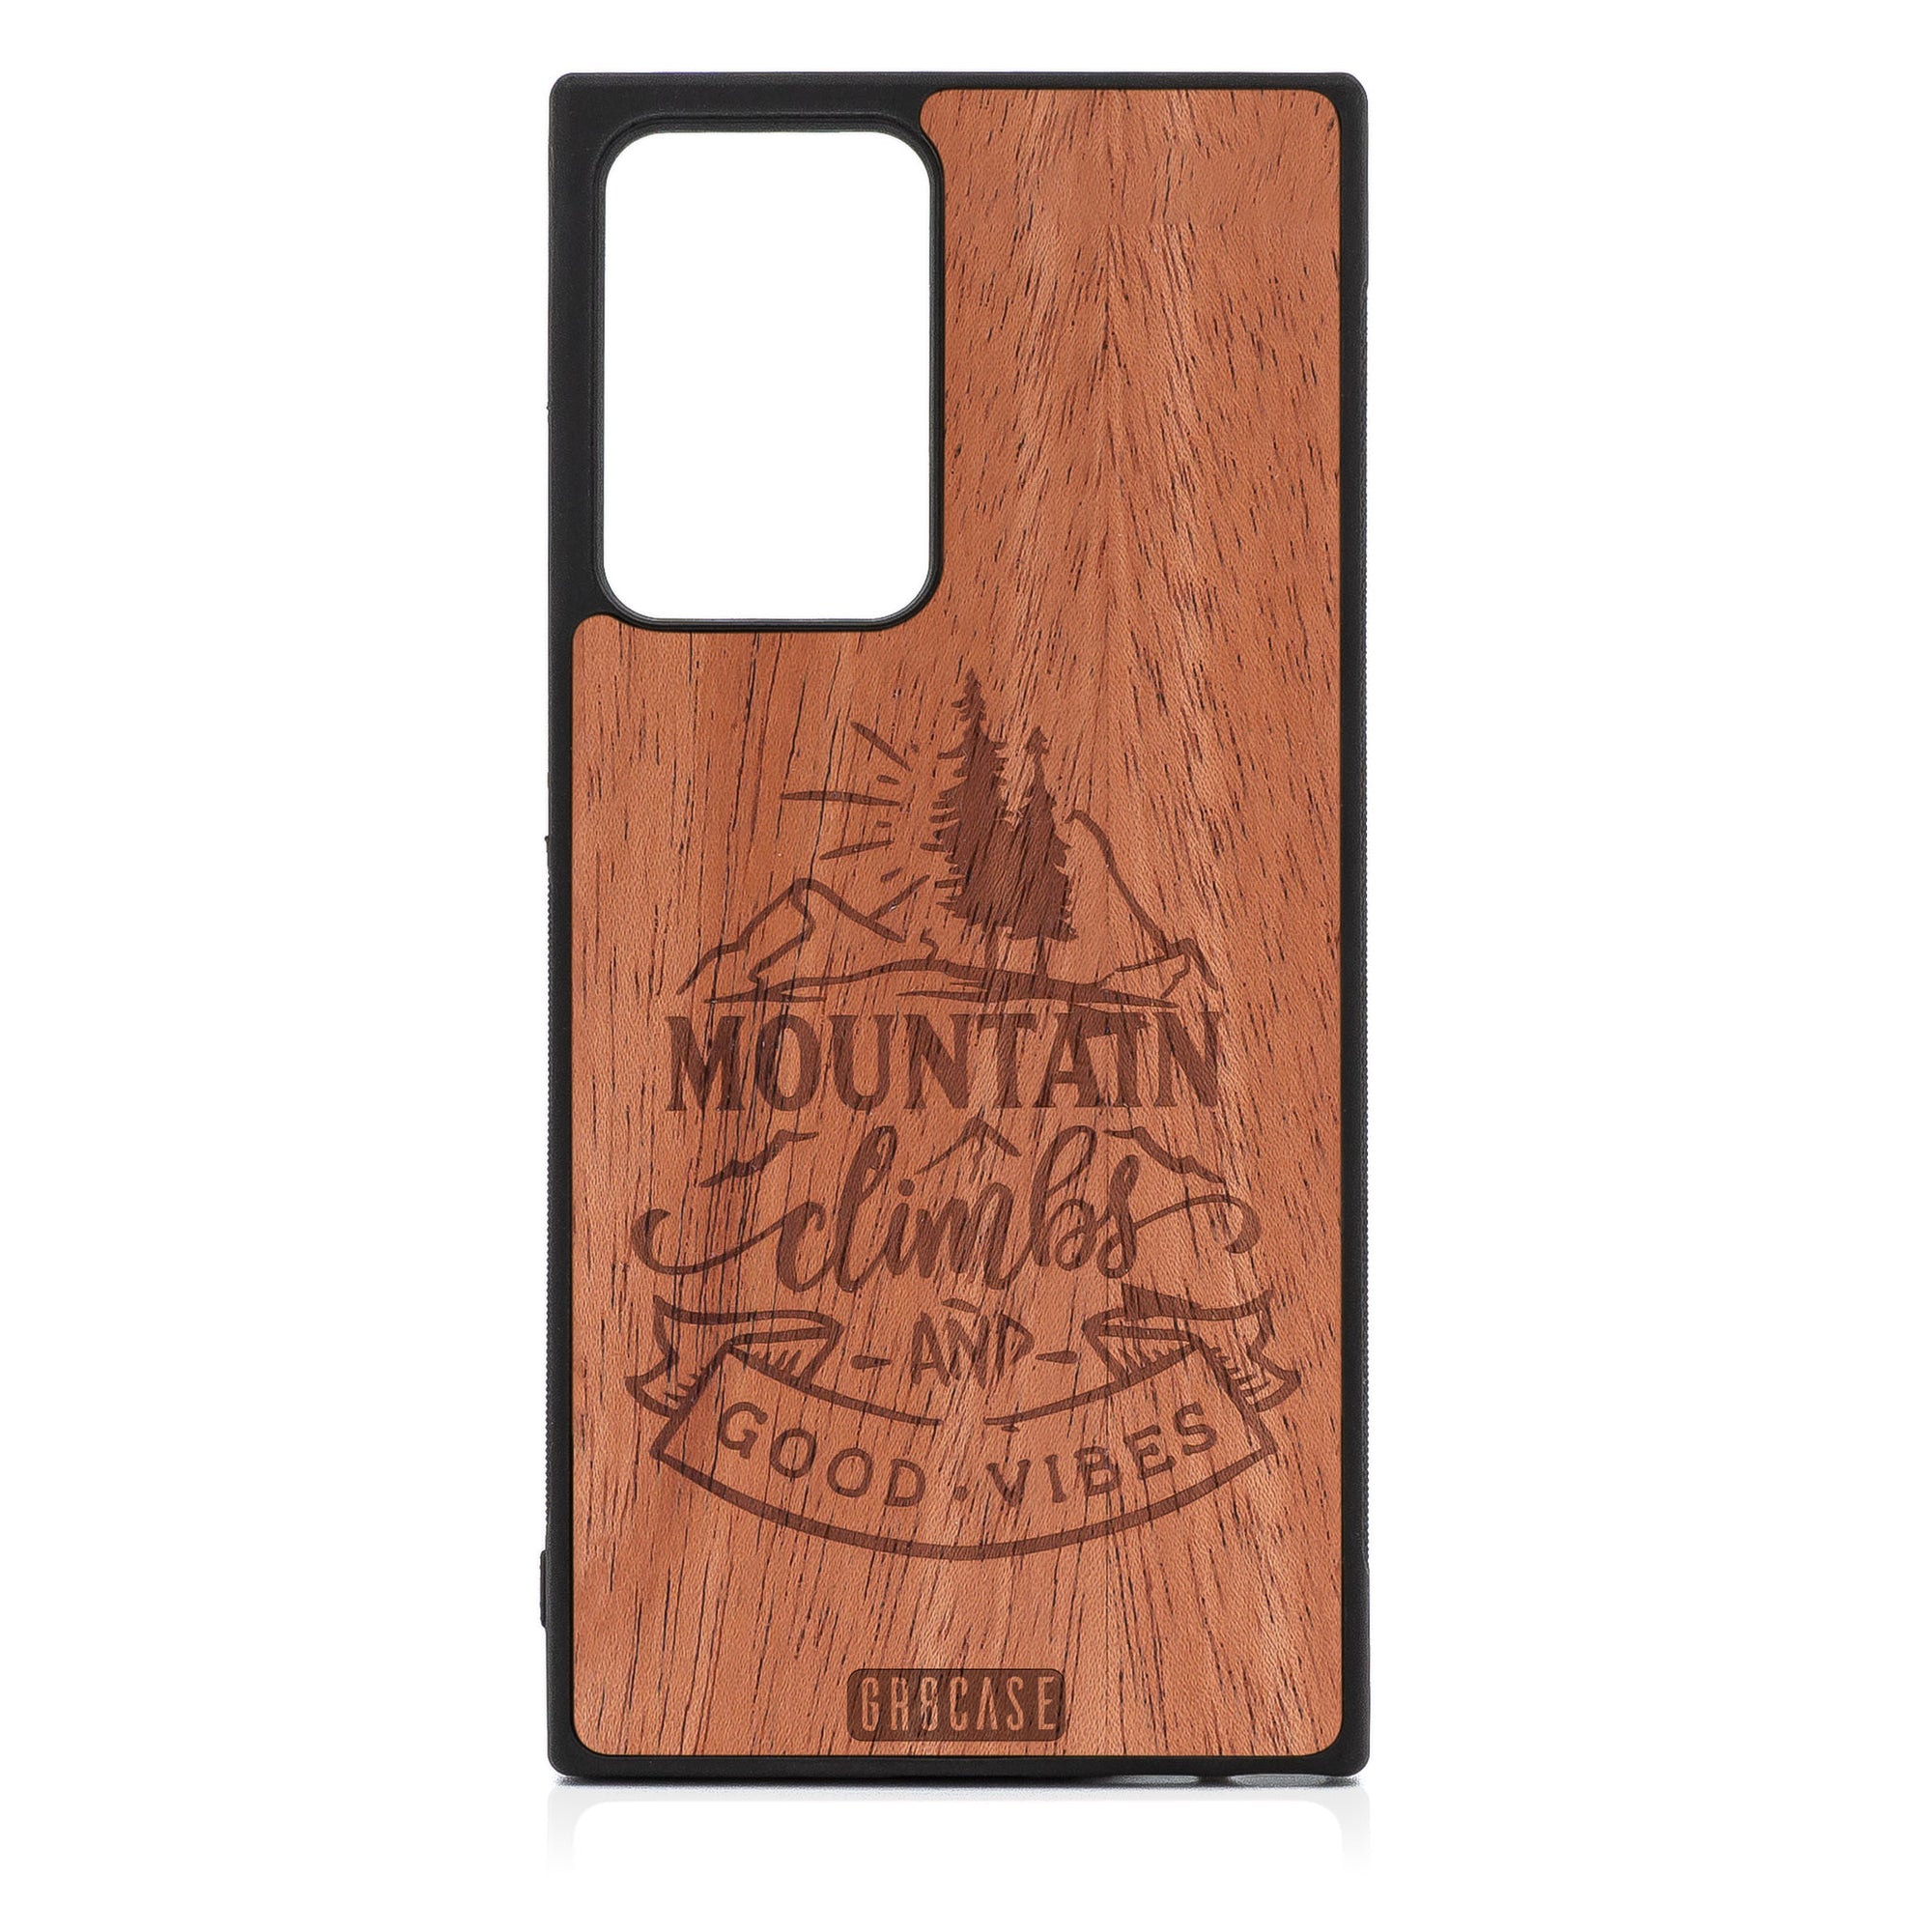 Mountain Climbs And Good Vibes Design Wood Case For Samsung Galaxy Note 20 Ultra